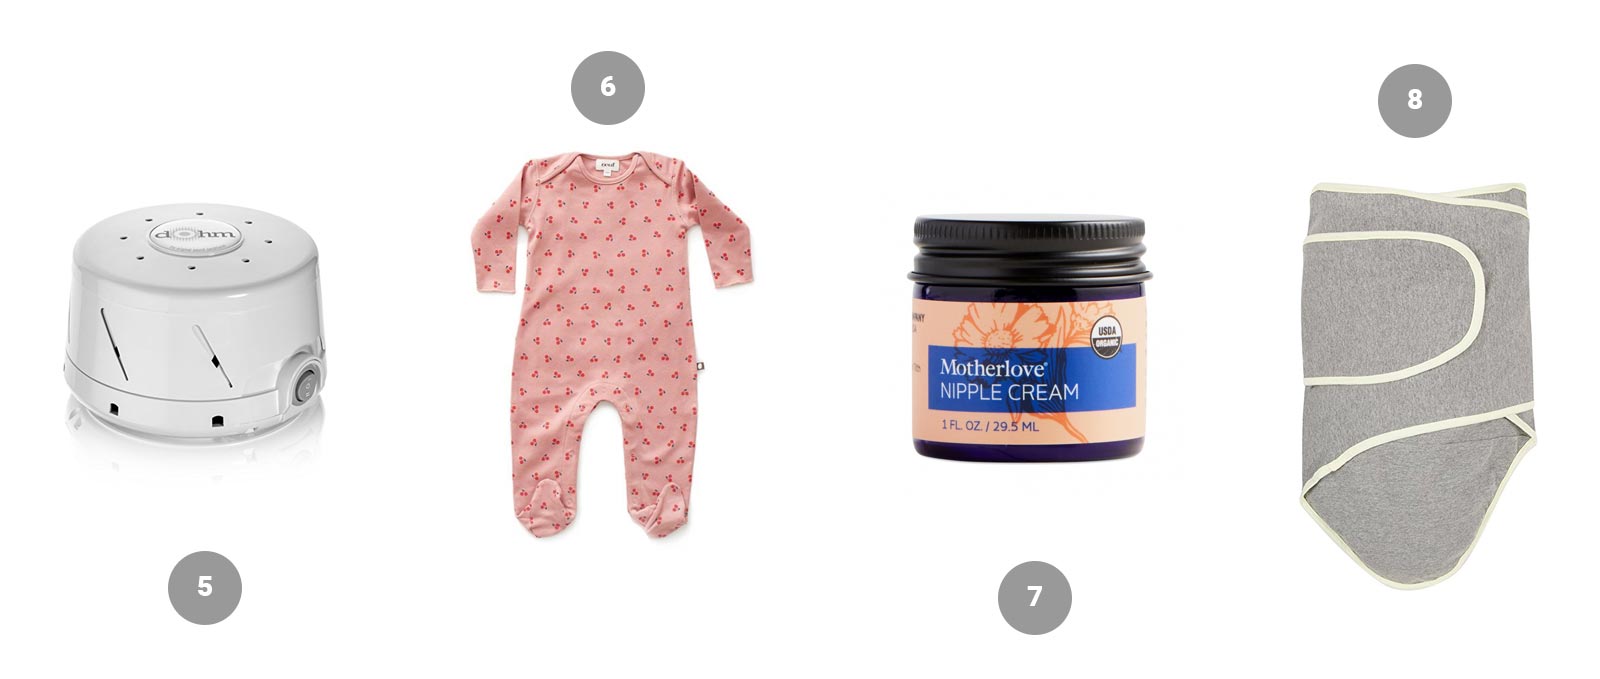 Baby 2 Must Haves